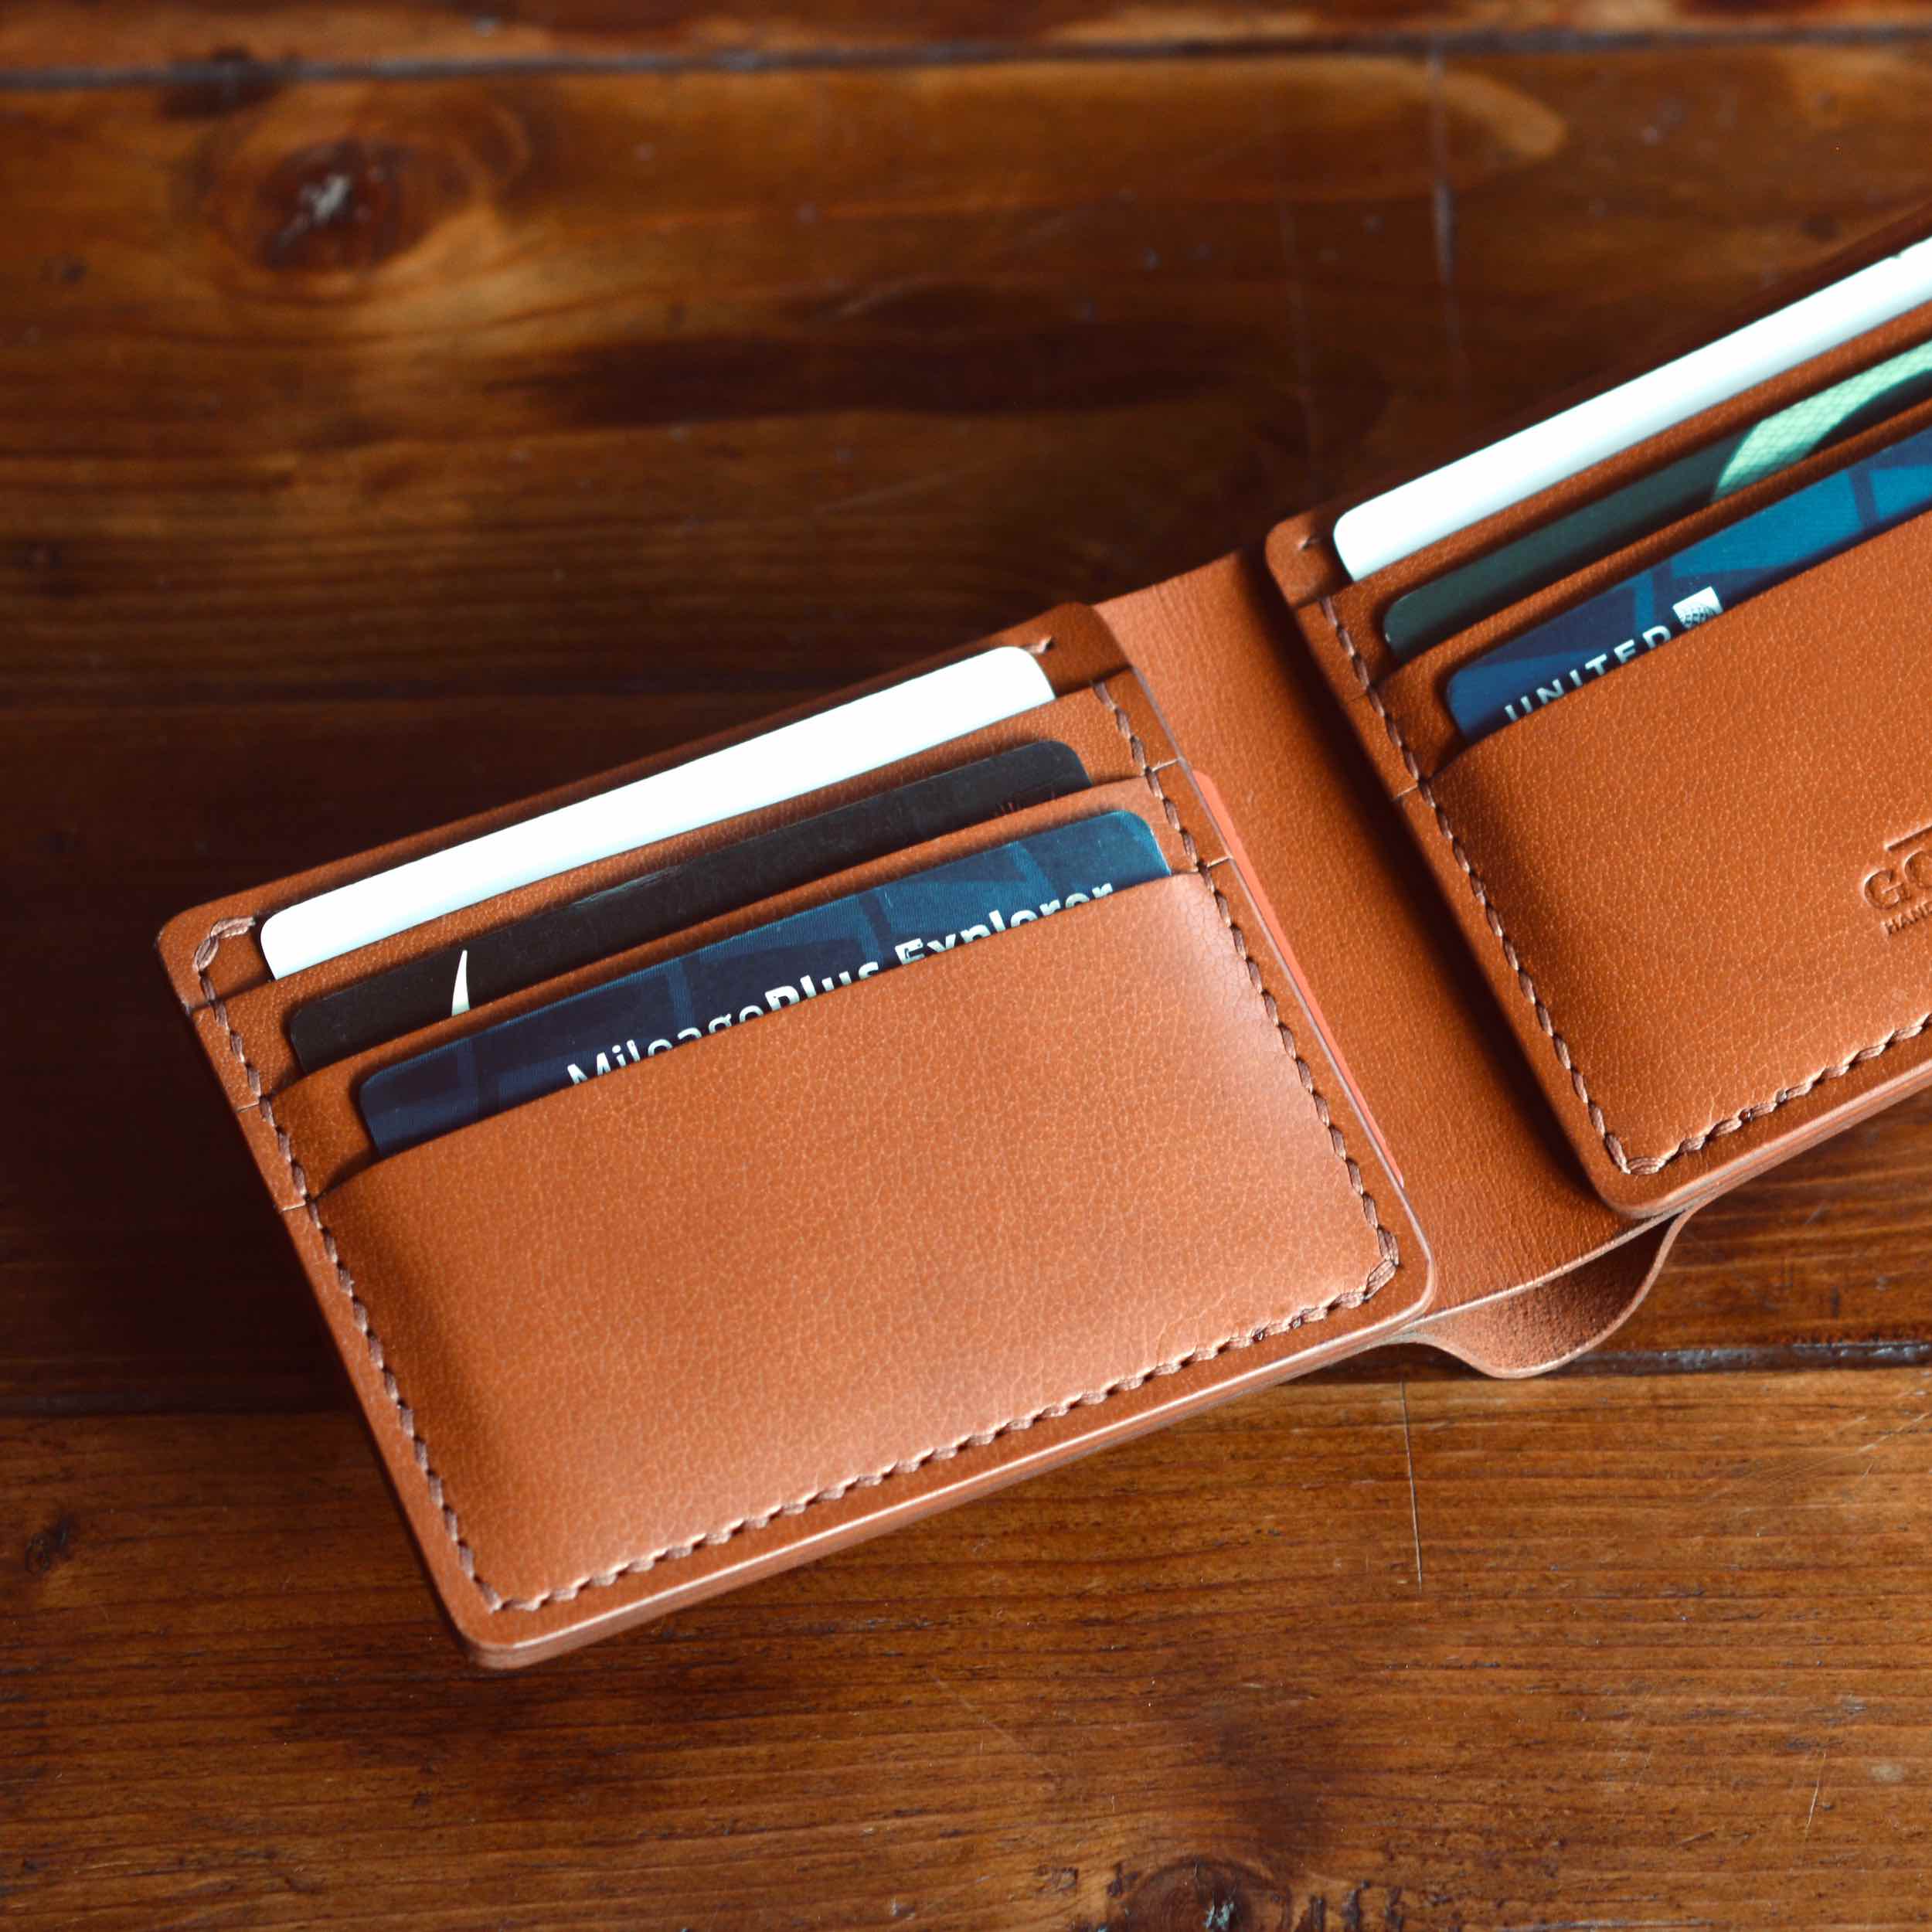 Luxury Men's Leather Wallet in Whisky Patina Brown Boxcalf & Blue Deerskin  by Fort Belvedere